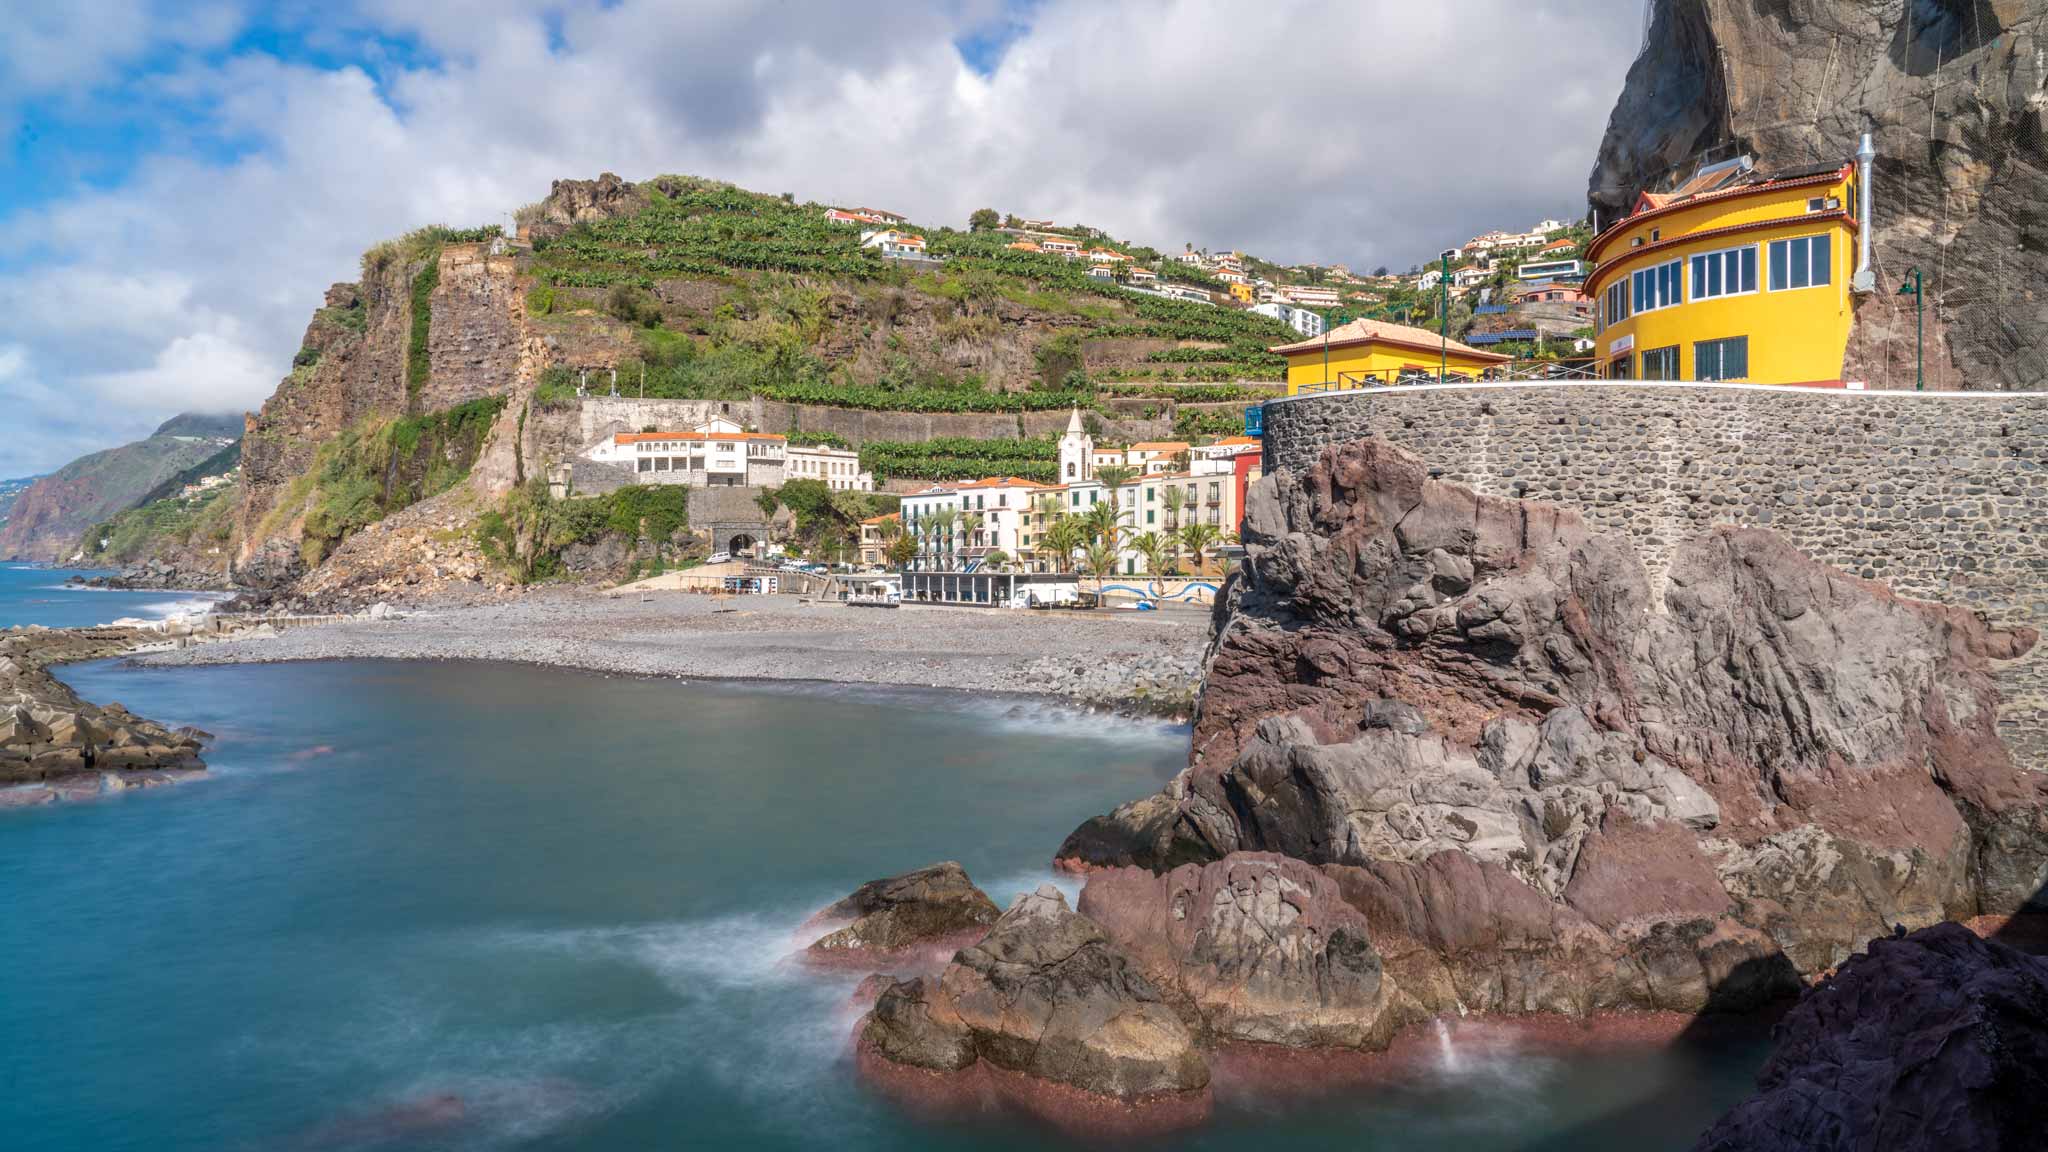 The village of Ponto do Sol in Madeira, with green hills and a small bay for swimming